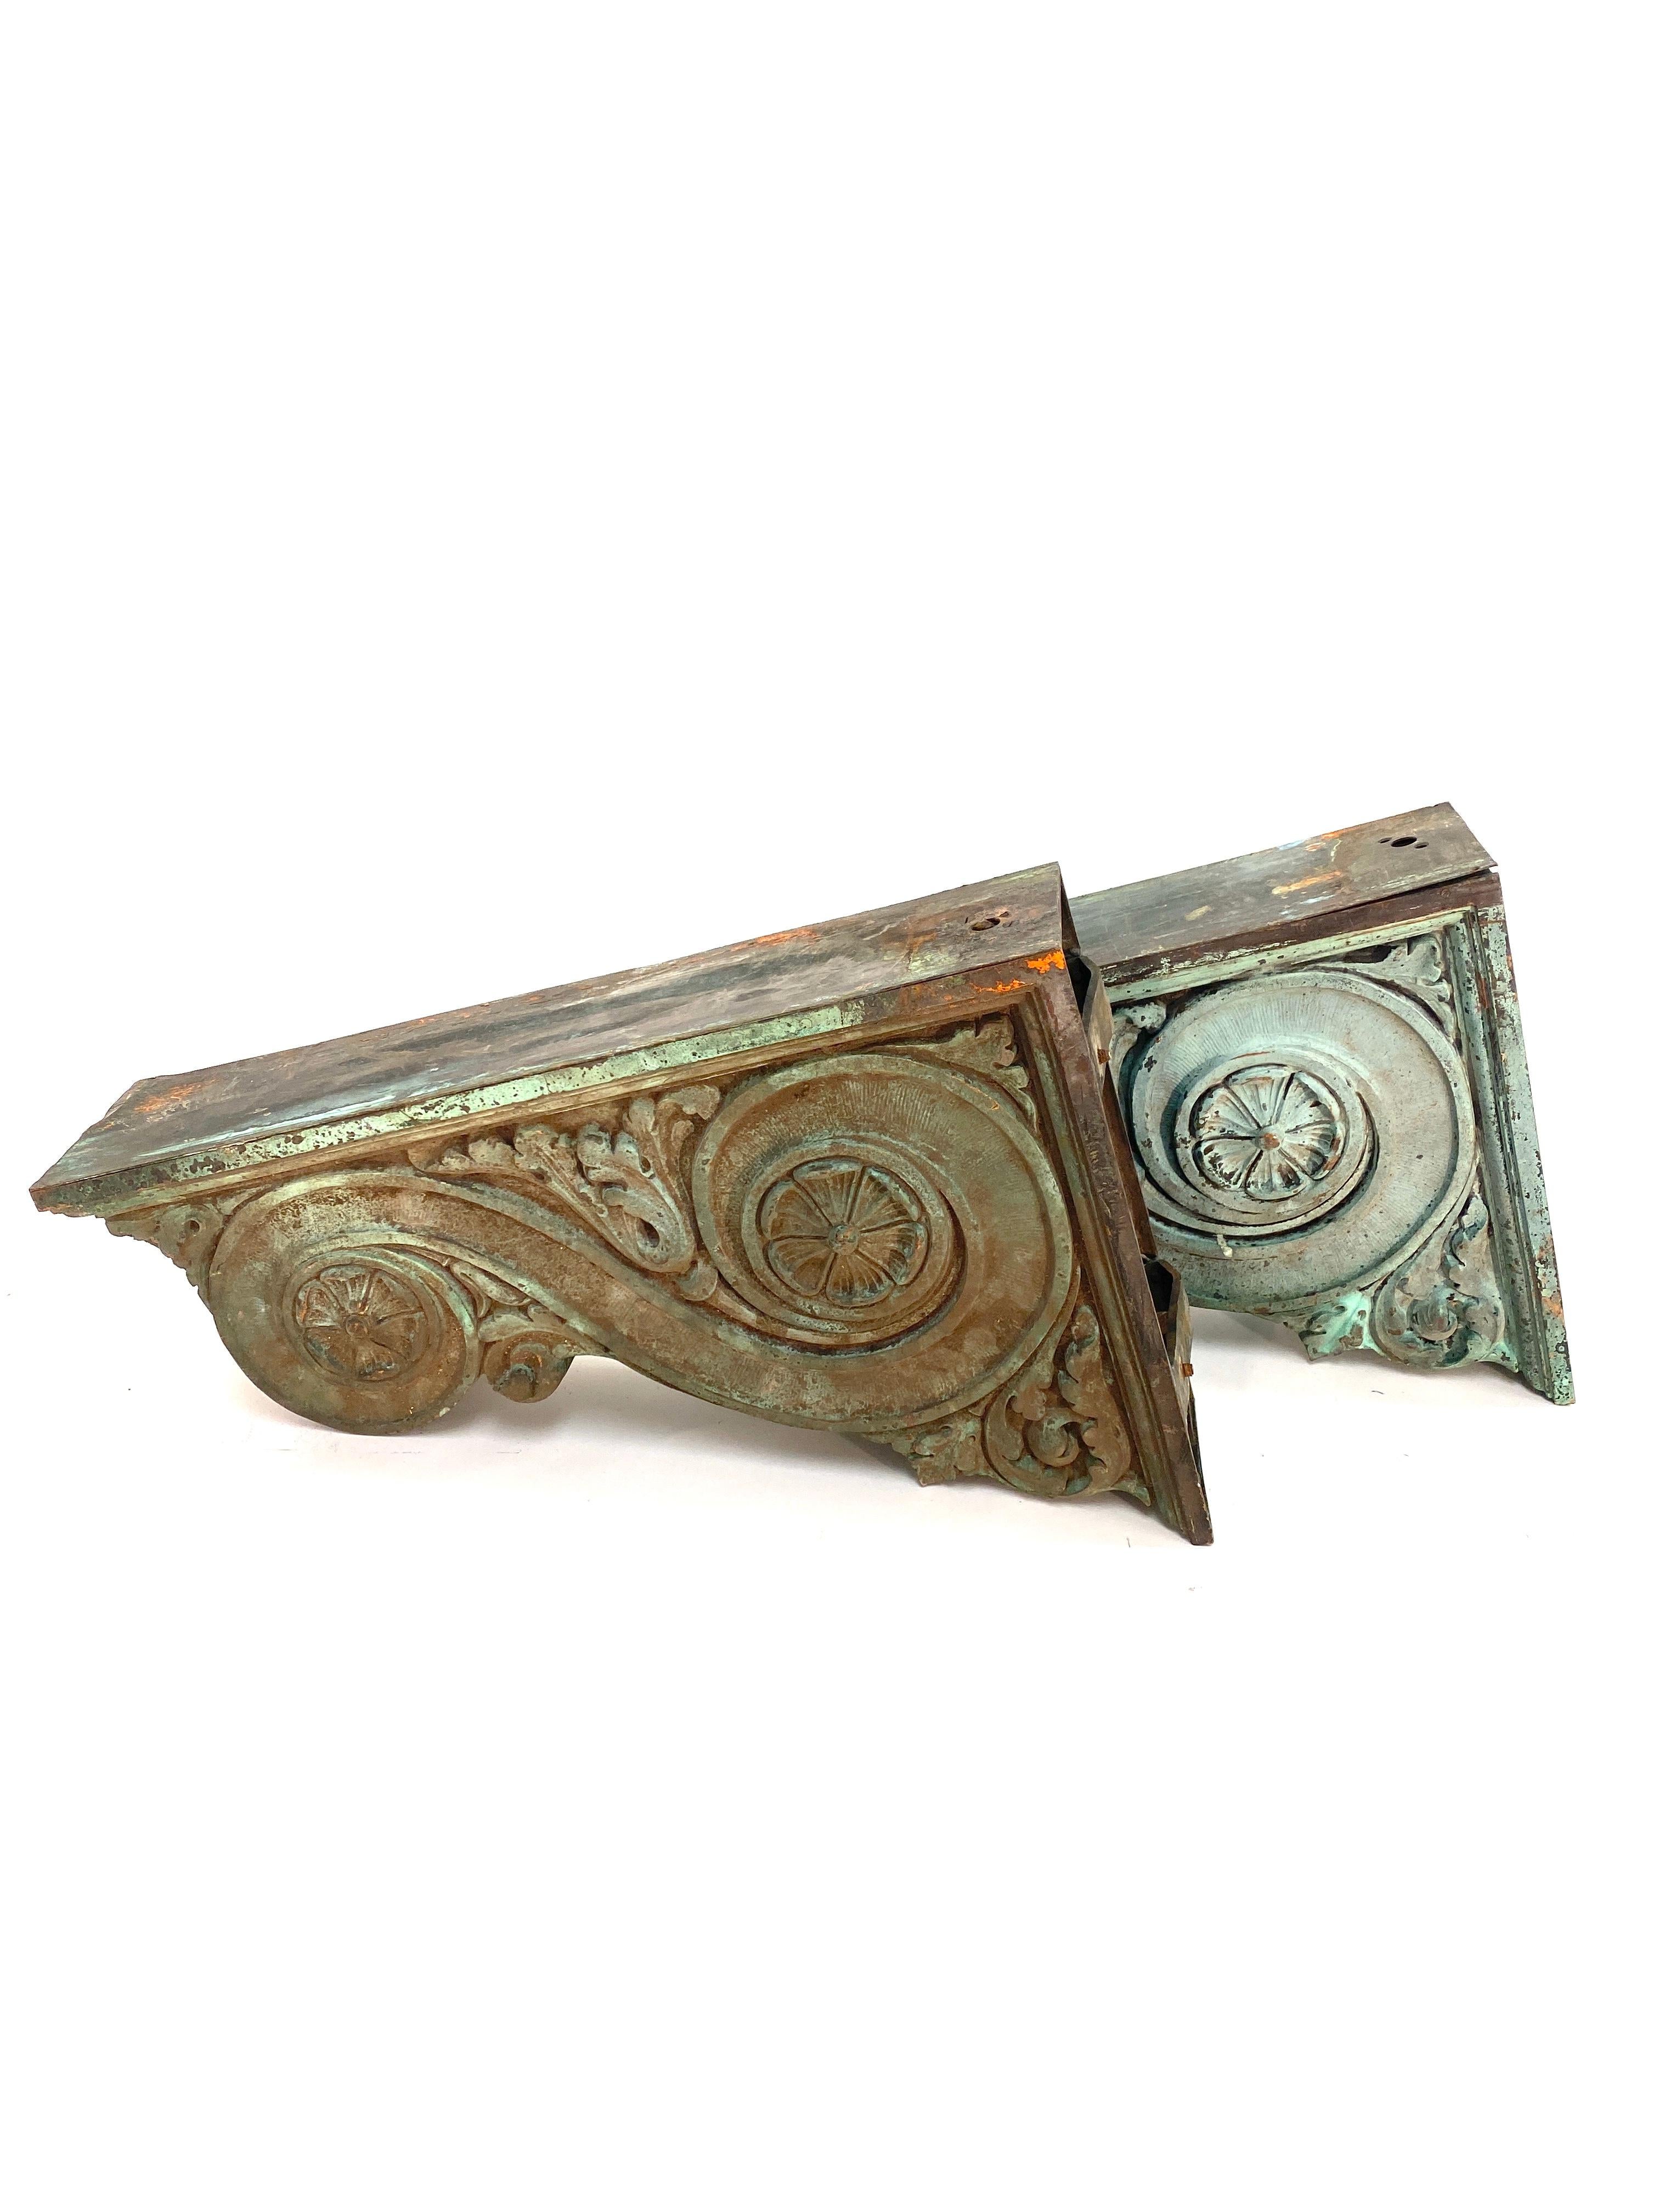 Pair of Heavy Bronze Architectural Corbels 2